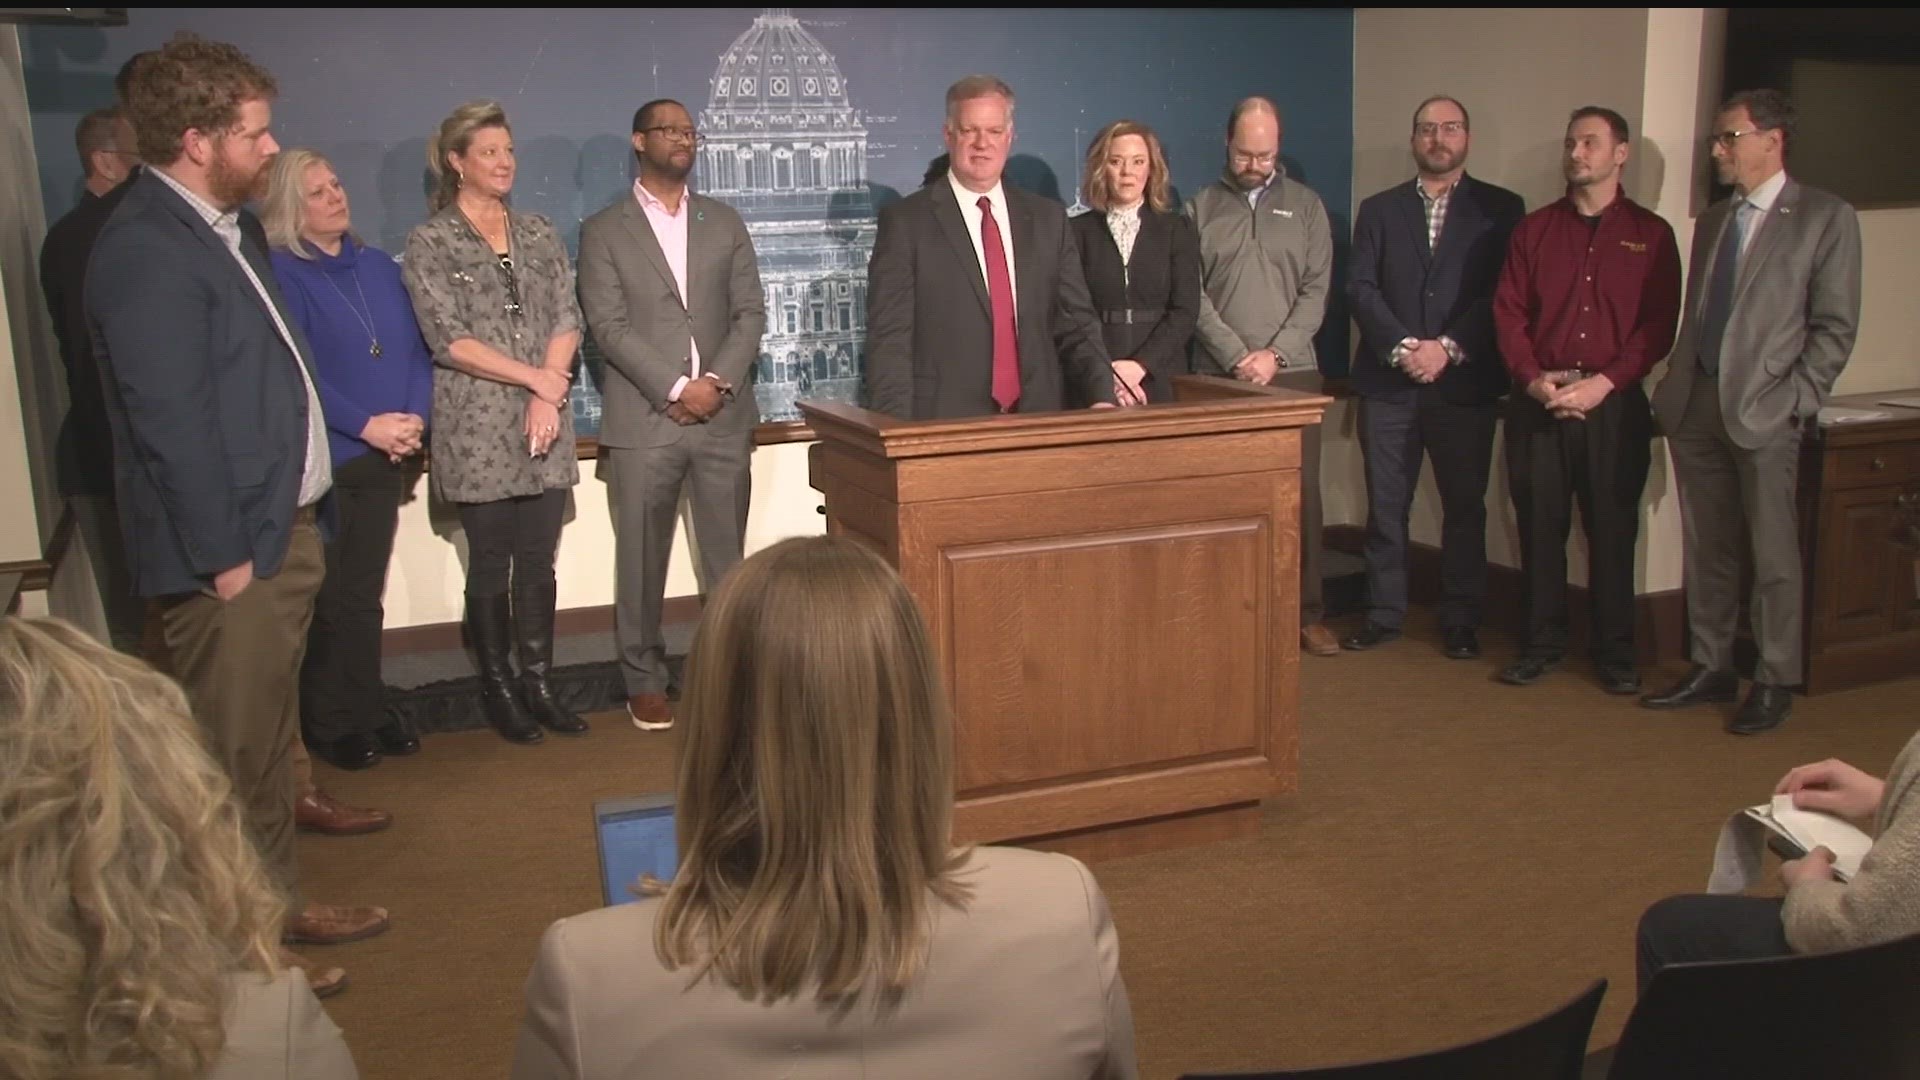 Minnesota lawmakers and business leaders introduced a bill Monday at the State Capitol that would define organized retail crime in state law in an effort to curb ret